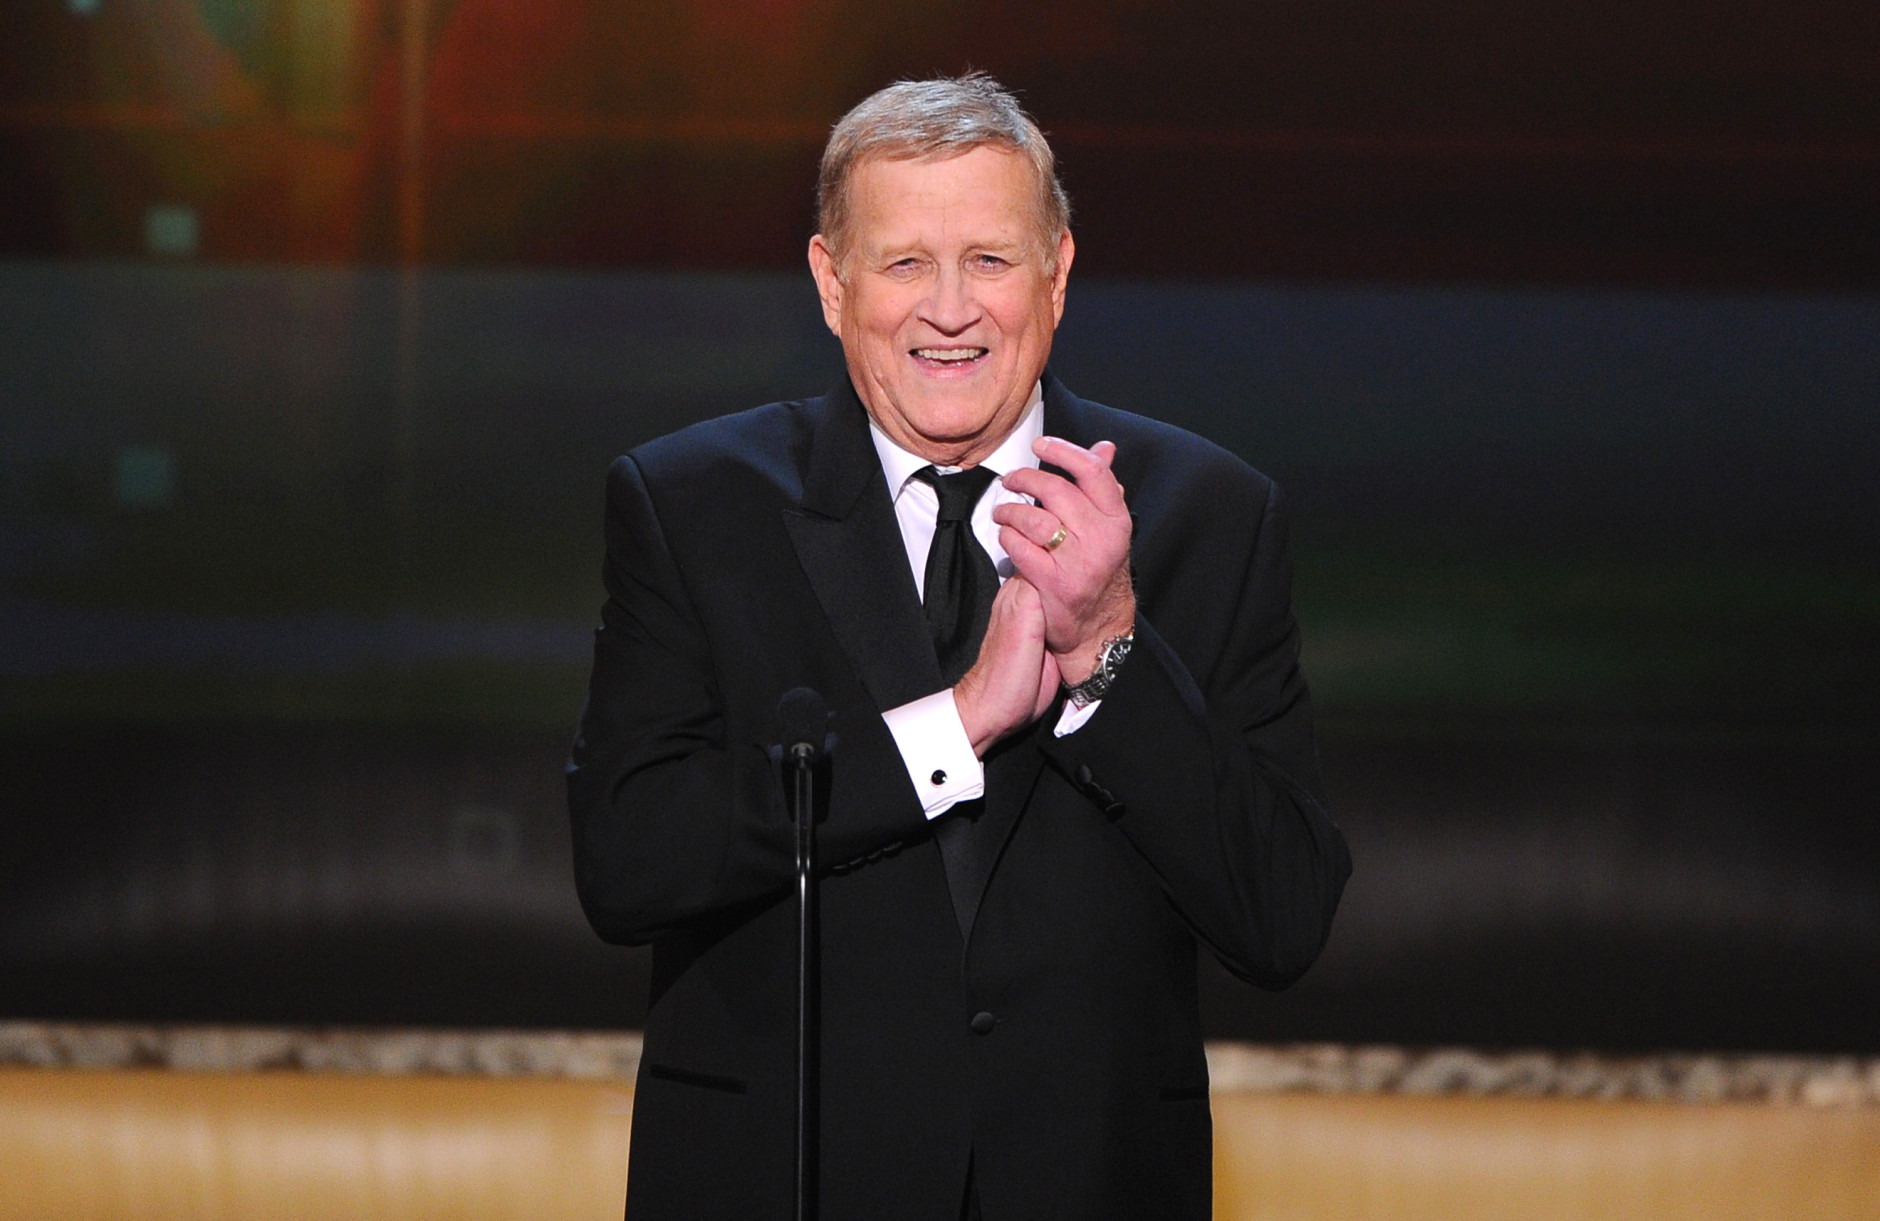 SAG President Ken Howard speaks on stage at the 21st annual Screen Actors Guild Awards at the Shrine Auditorium on Sunday, Jan. 25, 2015, in Los Angeles. Howard, who starred in 1970s series “The White Shadow” and has led the Screen Actors Guild for years, died, Wednesday, March 23, 2016, at age 71. No cause of death was given. (Photo by Vince Bucci/Invision/AP)